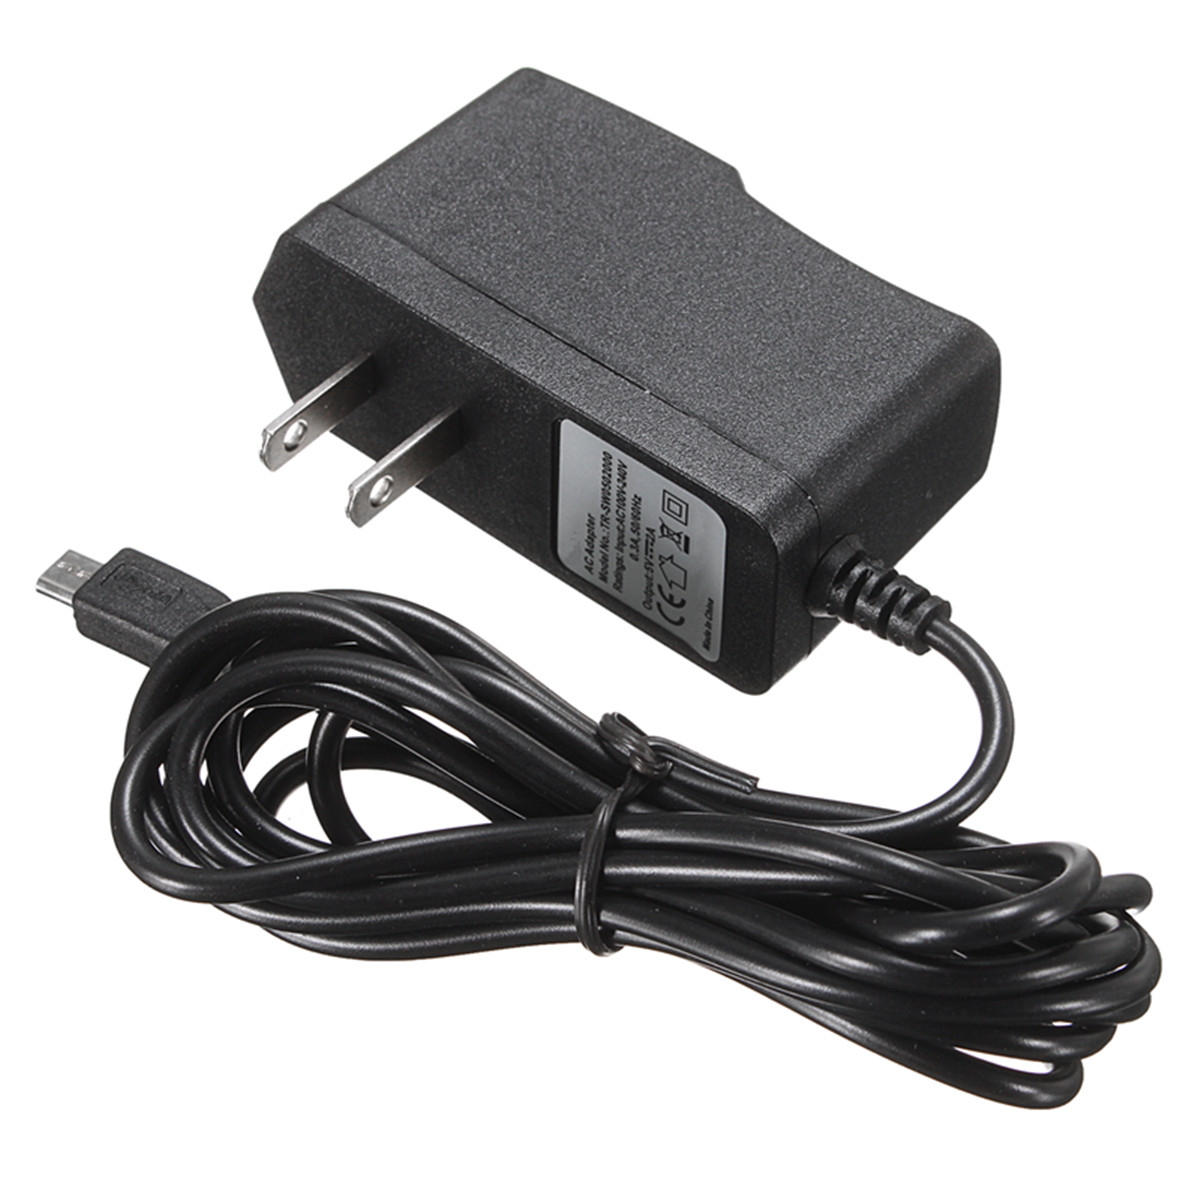 NES-Classic-Mini-AC-Charger-Adapter-for-Nintendo-Classic-Mini-Edition-Power-Supply-Charger-1363885-4